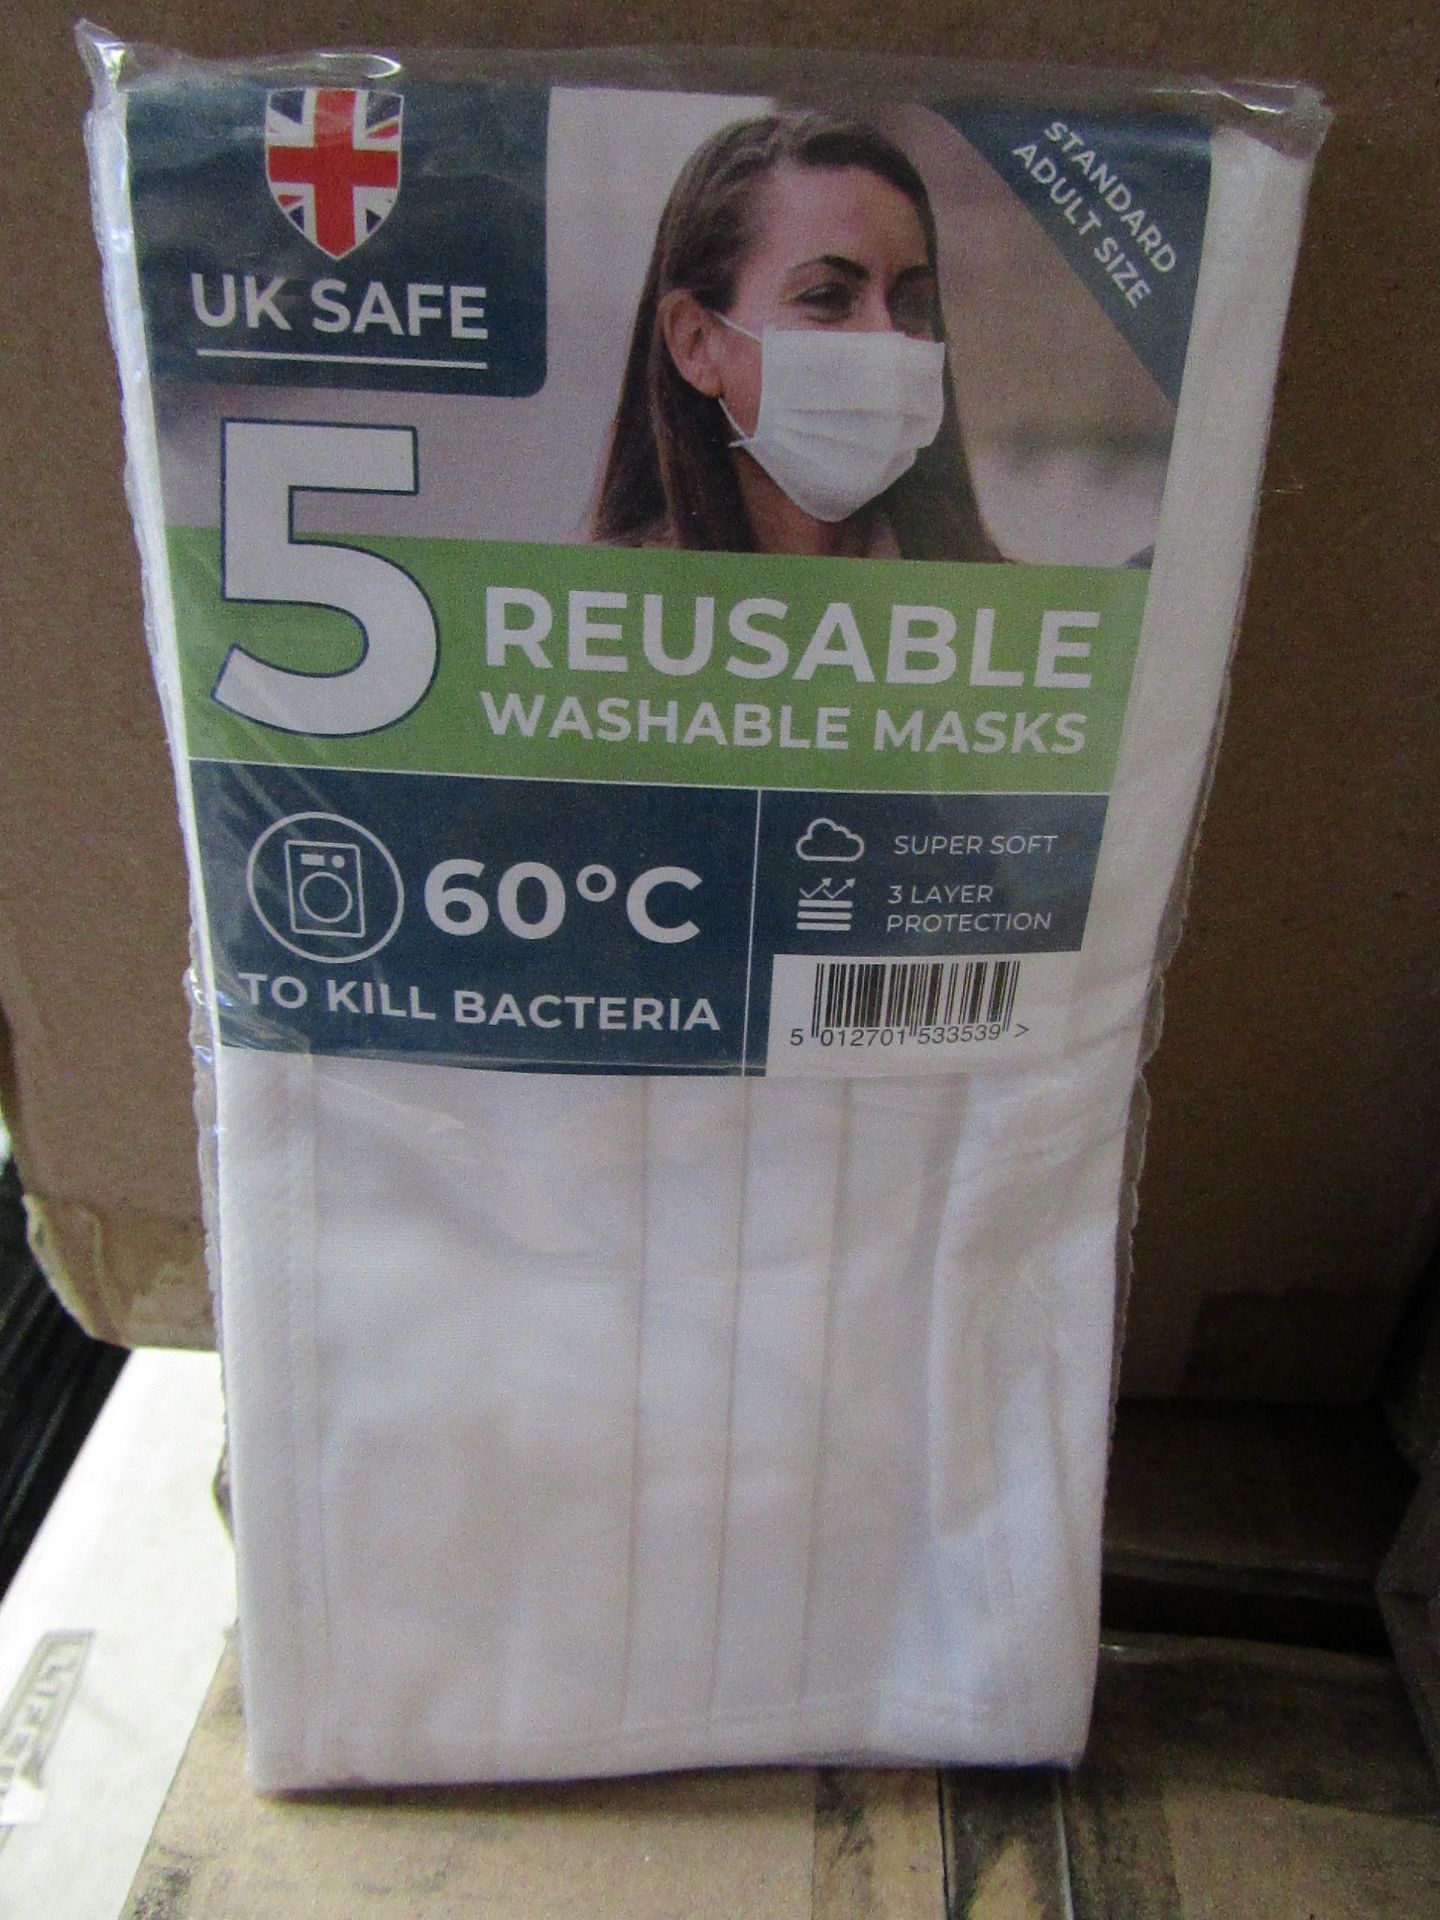 50x Pack's of 5 Reusable Washable Face Masks - New & Packaged.